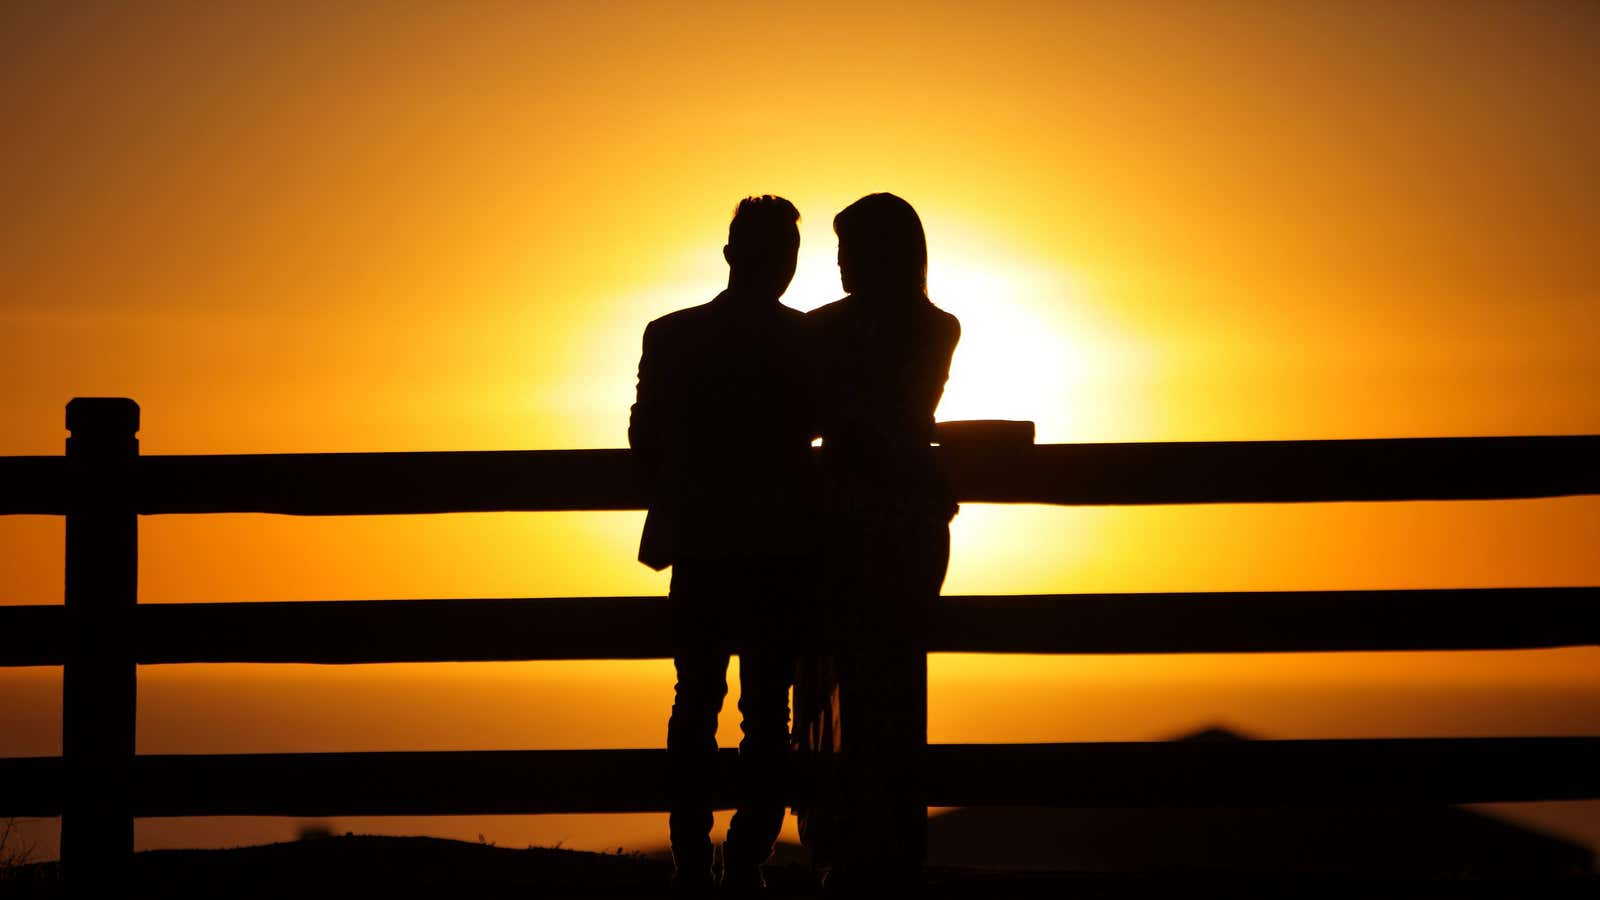 Celebrity Chef Derrick Peltz seen with fiancé Kimberly Fox enjoying the sunset at the Palisades Park on Friday, October 10th, 2015, in Santa Monica, CA.